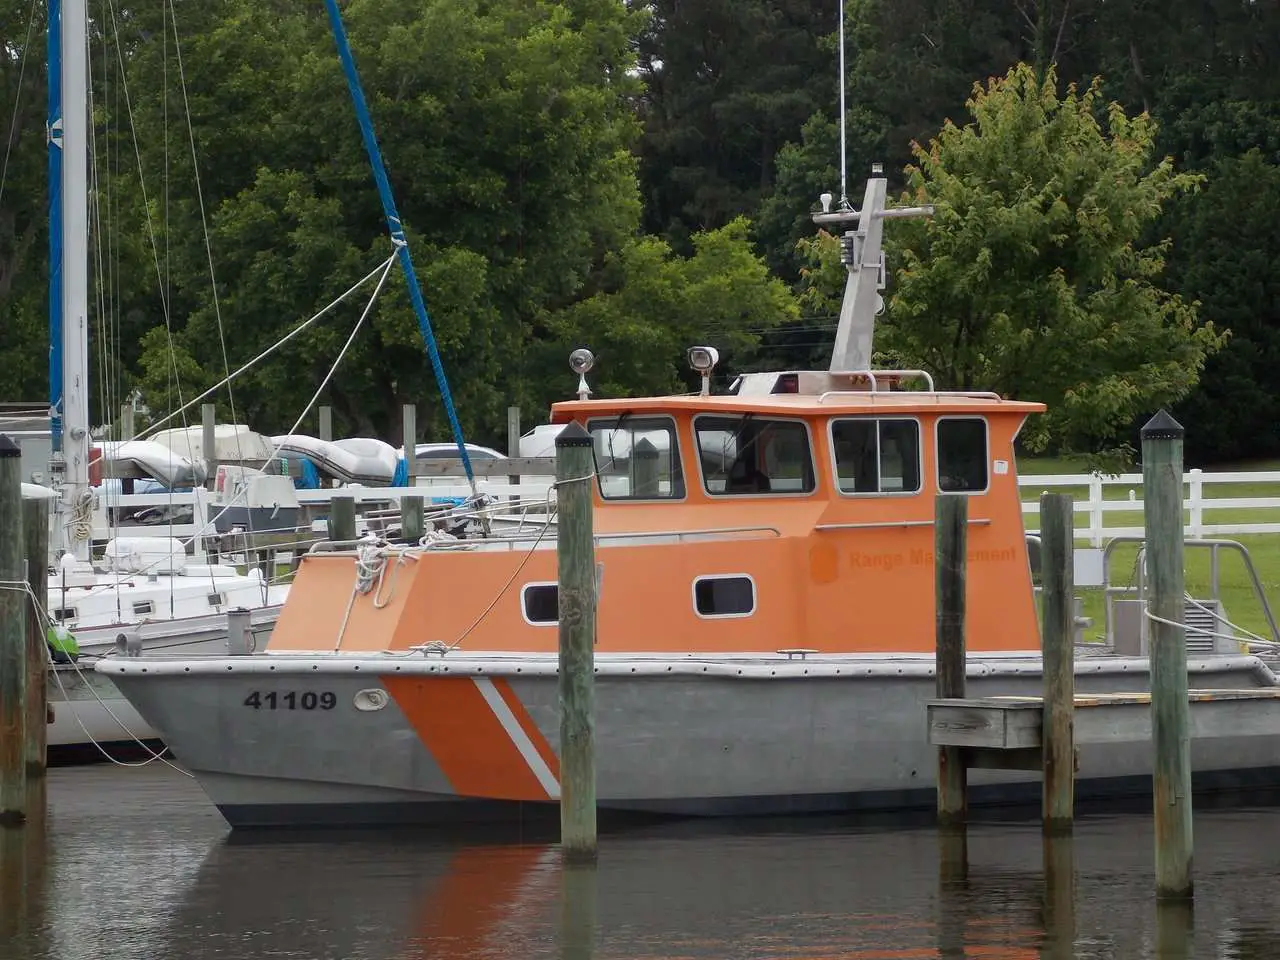 1972 Used Us Coast Guard UTB 41 Commercial Boat For Sale